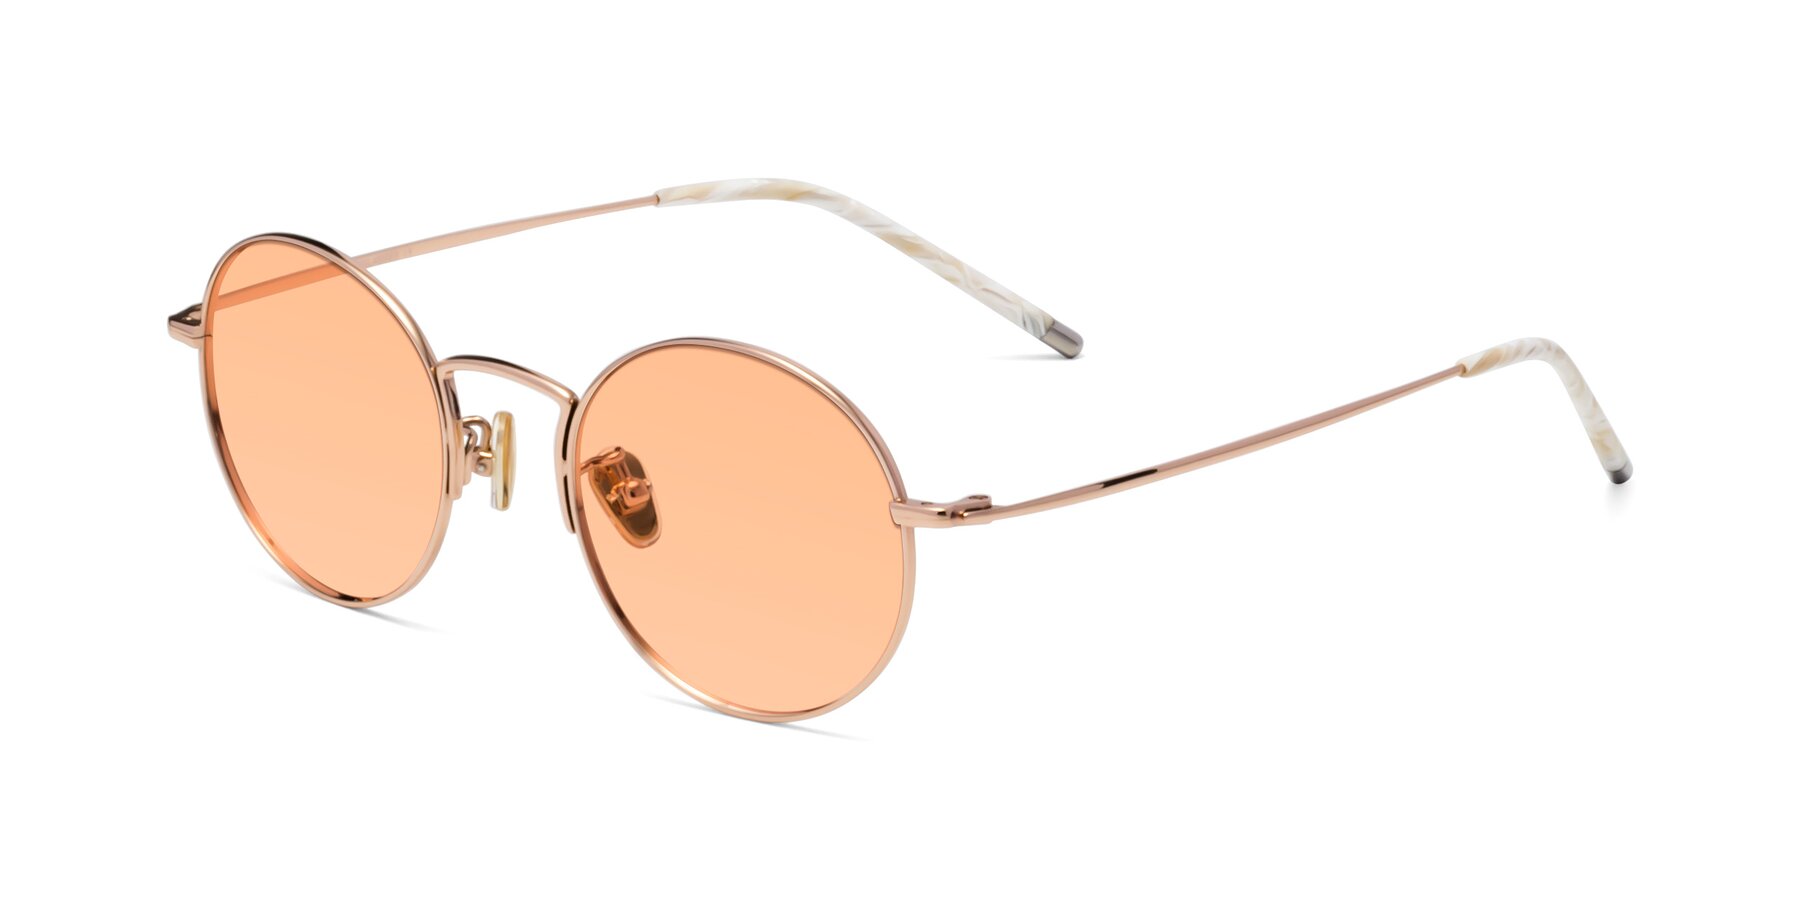 Angle of 80033 in Rose Gold with Light Orange Tinted Lenses